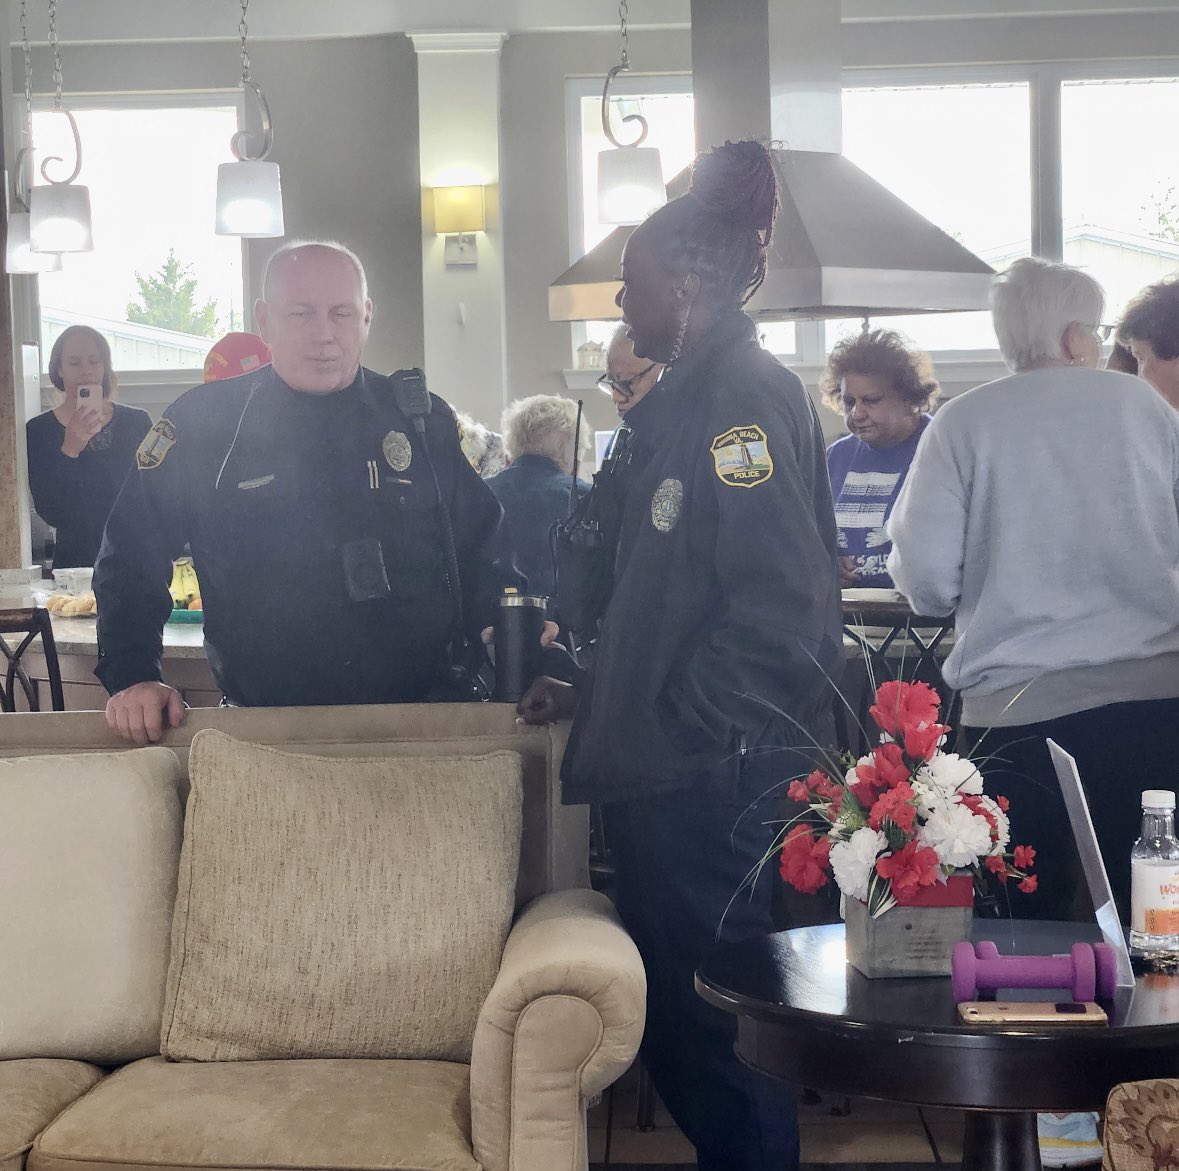 Our neighbors at 900 Aqua Senior Apartments hosted Coffee with a Cop for their residents. They supplied the coffee, snacks, and fabulous conversation. Thank you for the invitation and hospitality! We look forward to doing it again in the fall!